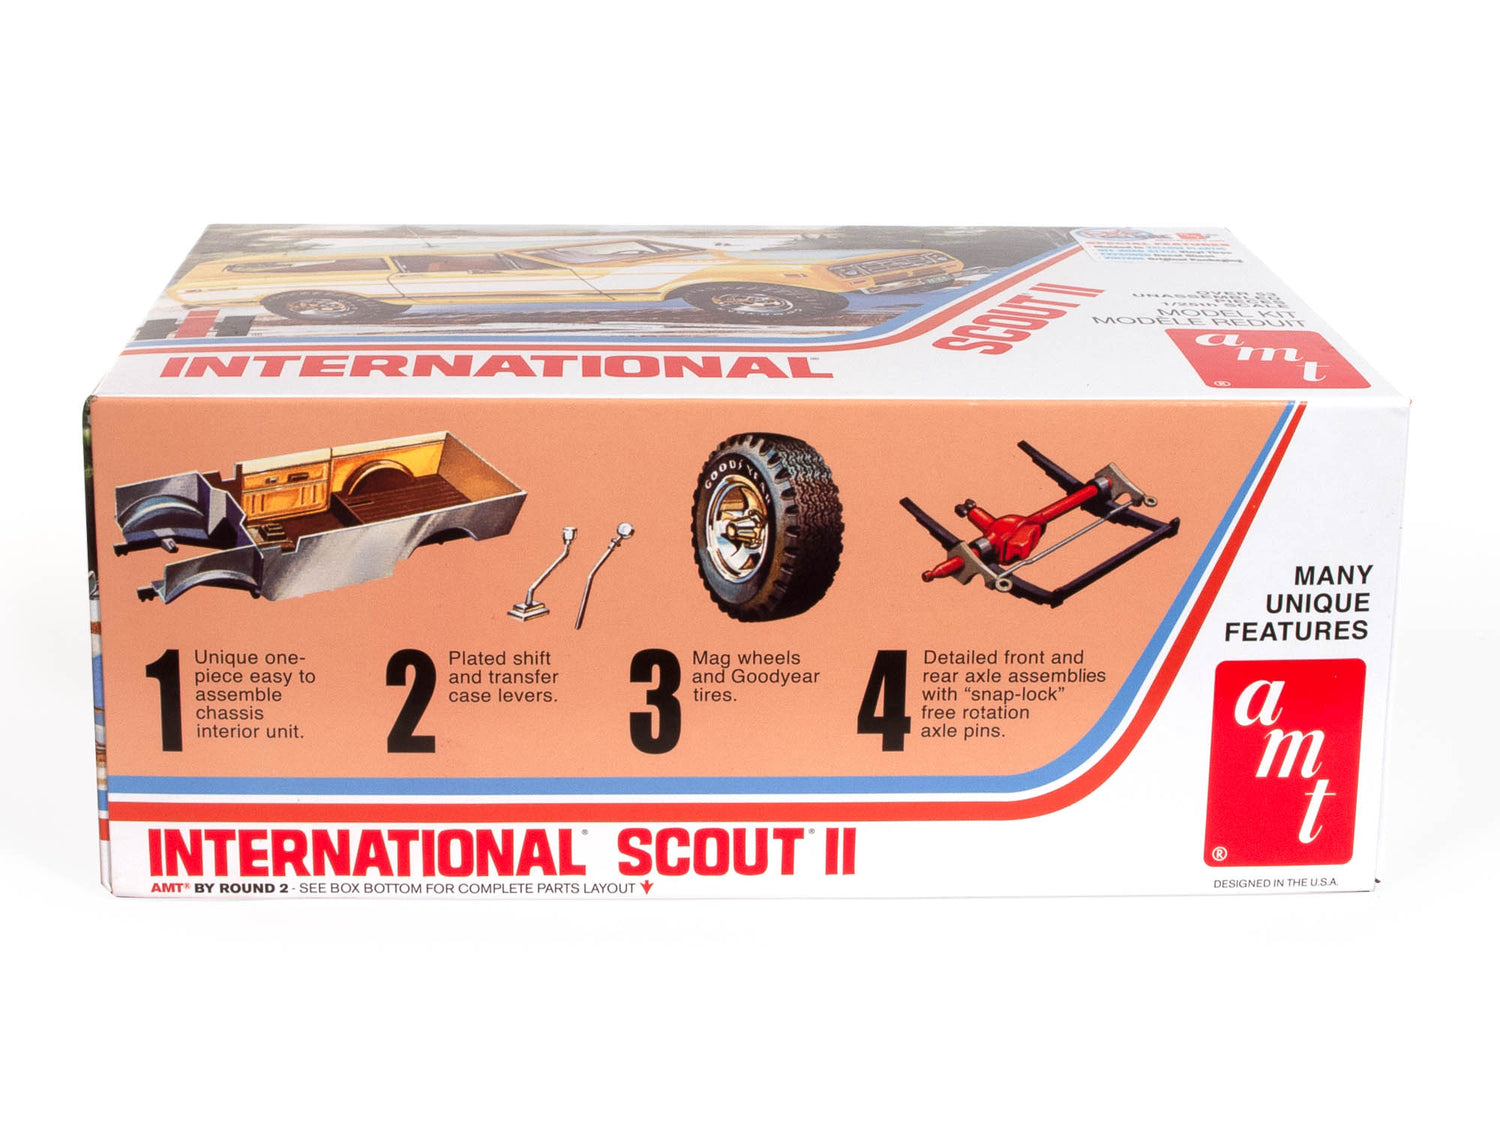 Includes: Unique one-piece easy to assemble Chassis interior unit, Plated shift and transfer case levers, Mag wheels and Goodyear tires, and Detailed front and real axle assemblies with "snap-lock" free rotation axle pins.